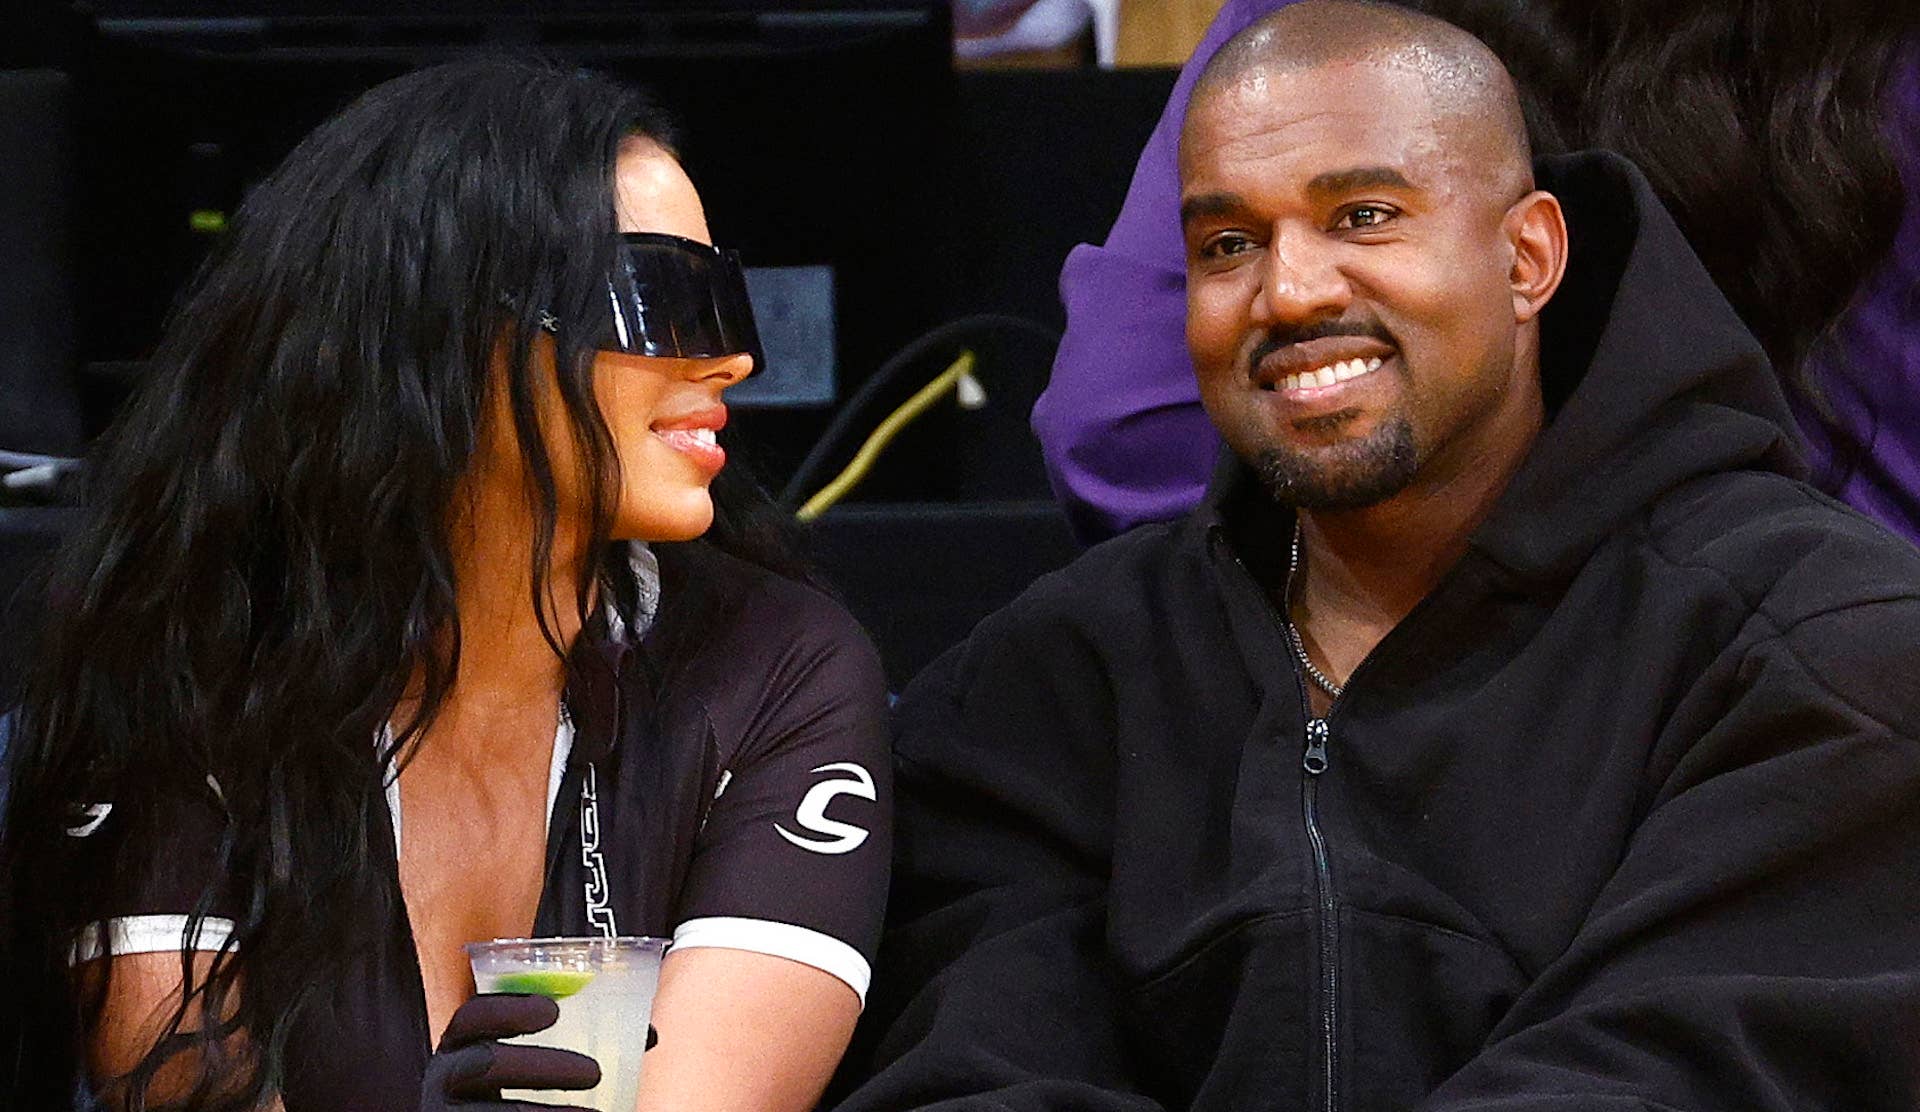 Kanye West and Chaney Jones attend a game between the Washington Wizards and Los Angeles Lakers